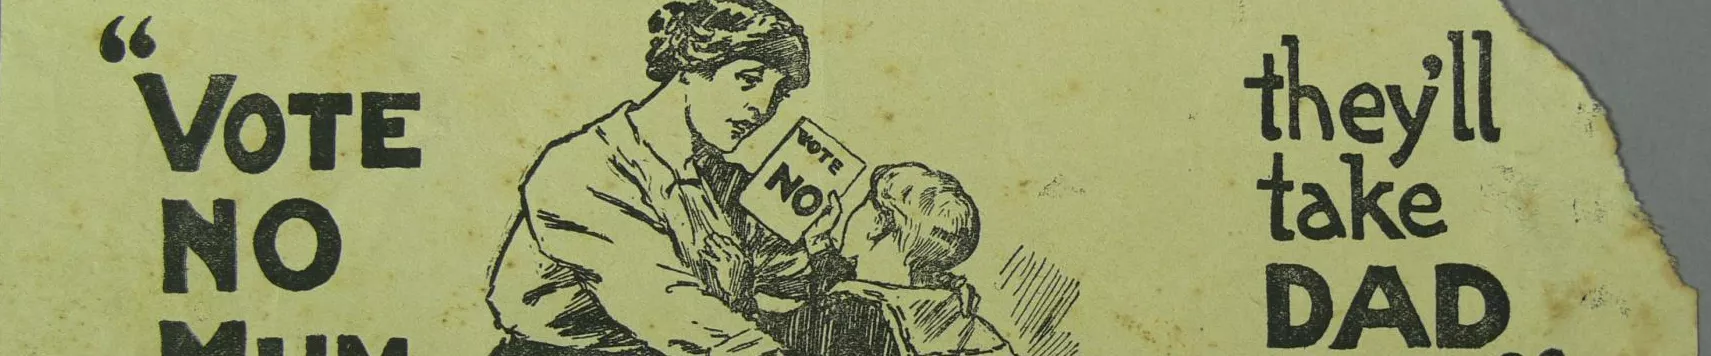 A yellowed leaflet with black script writing and an image of a mother and a child. The corner of the leaflet is torn off removing some of the text. The text reads Australian Labor Party Anti-Conscription Campaign. Vote no mum, they'll take dad next. Vote no.